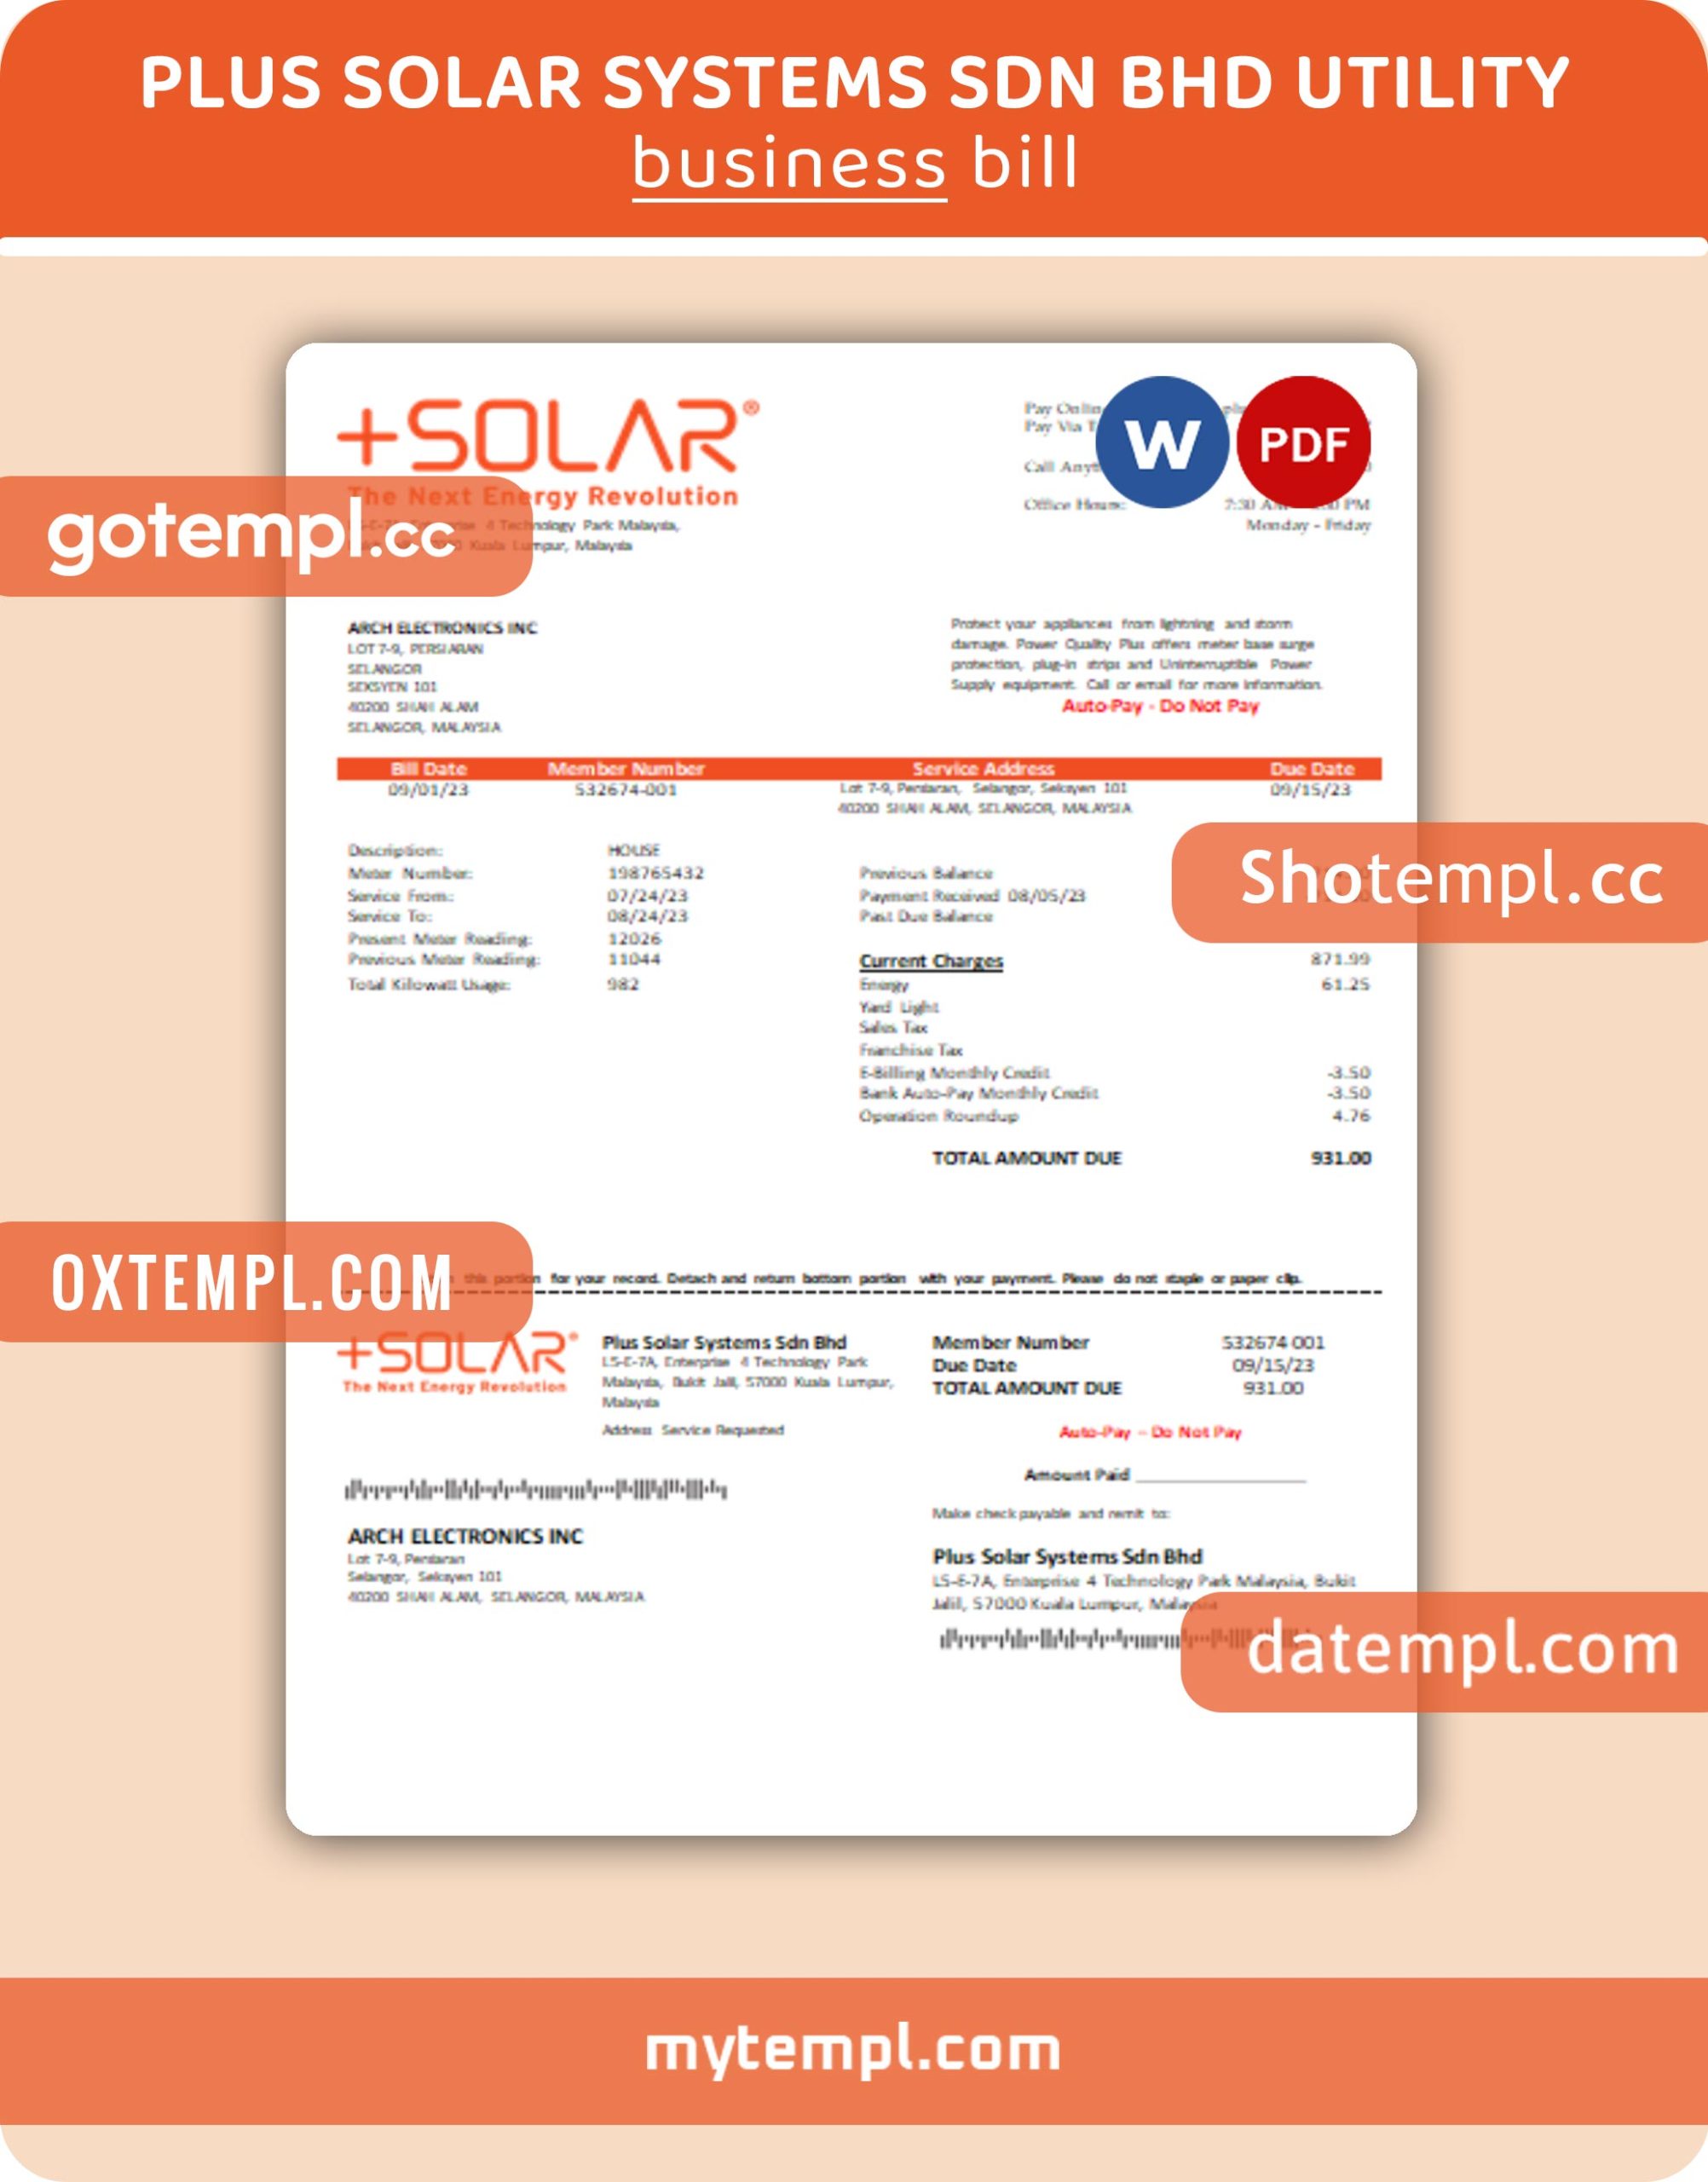 Plus Solar Systems Sdn Bhd business utility bill, PDF and WORD template